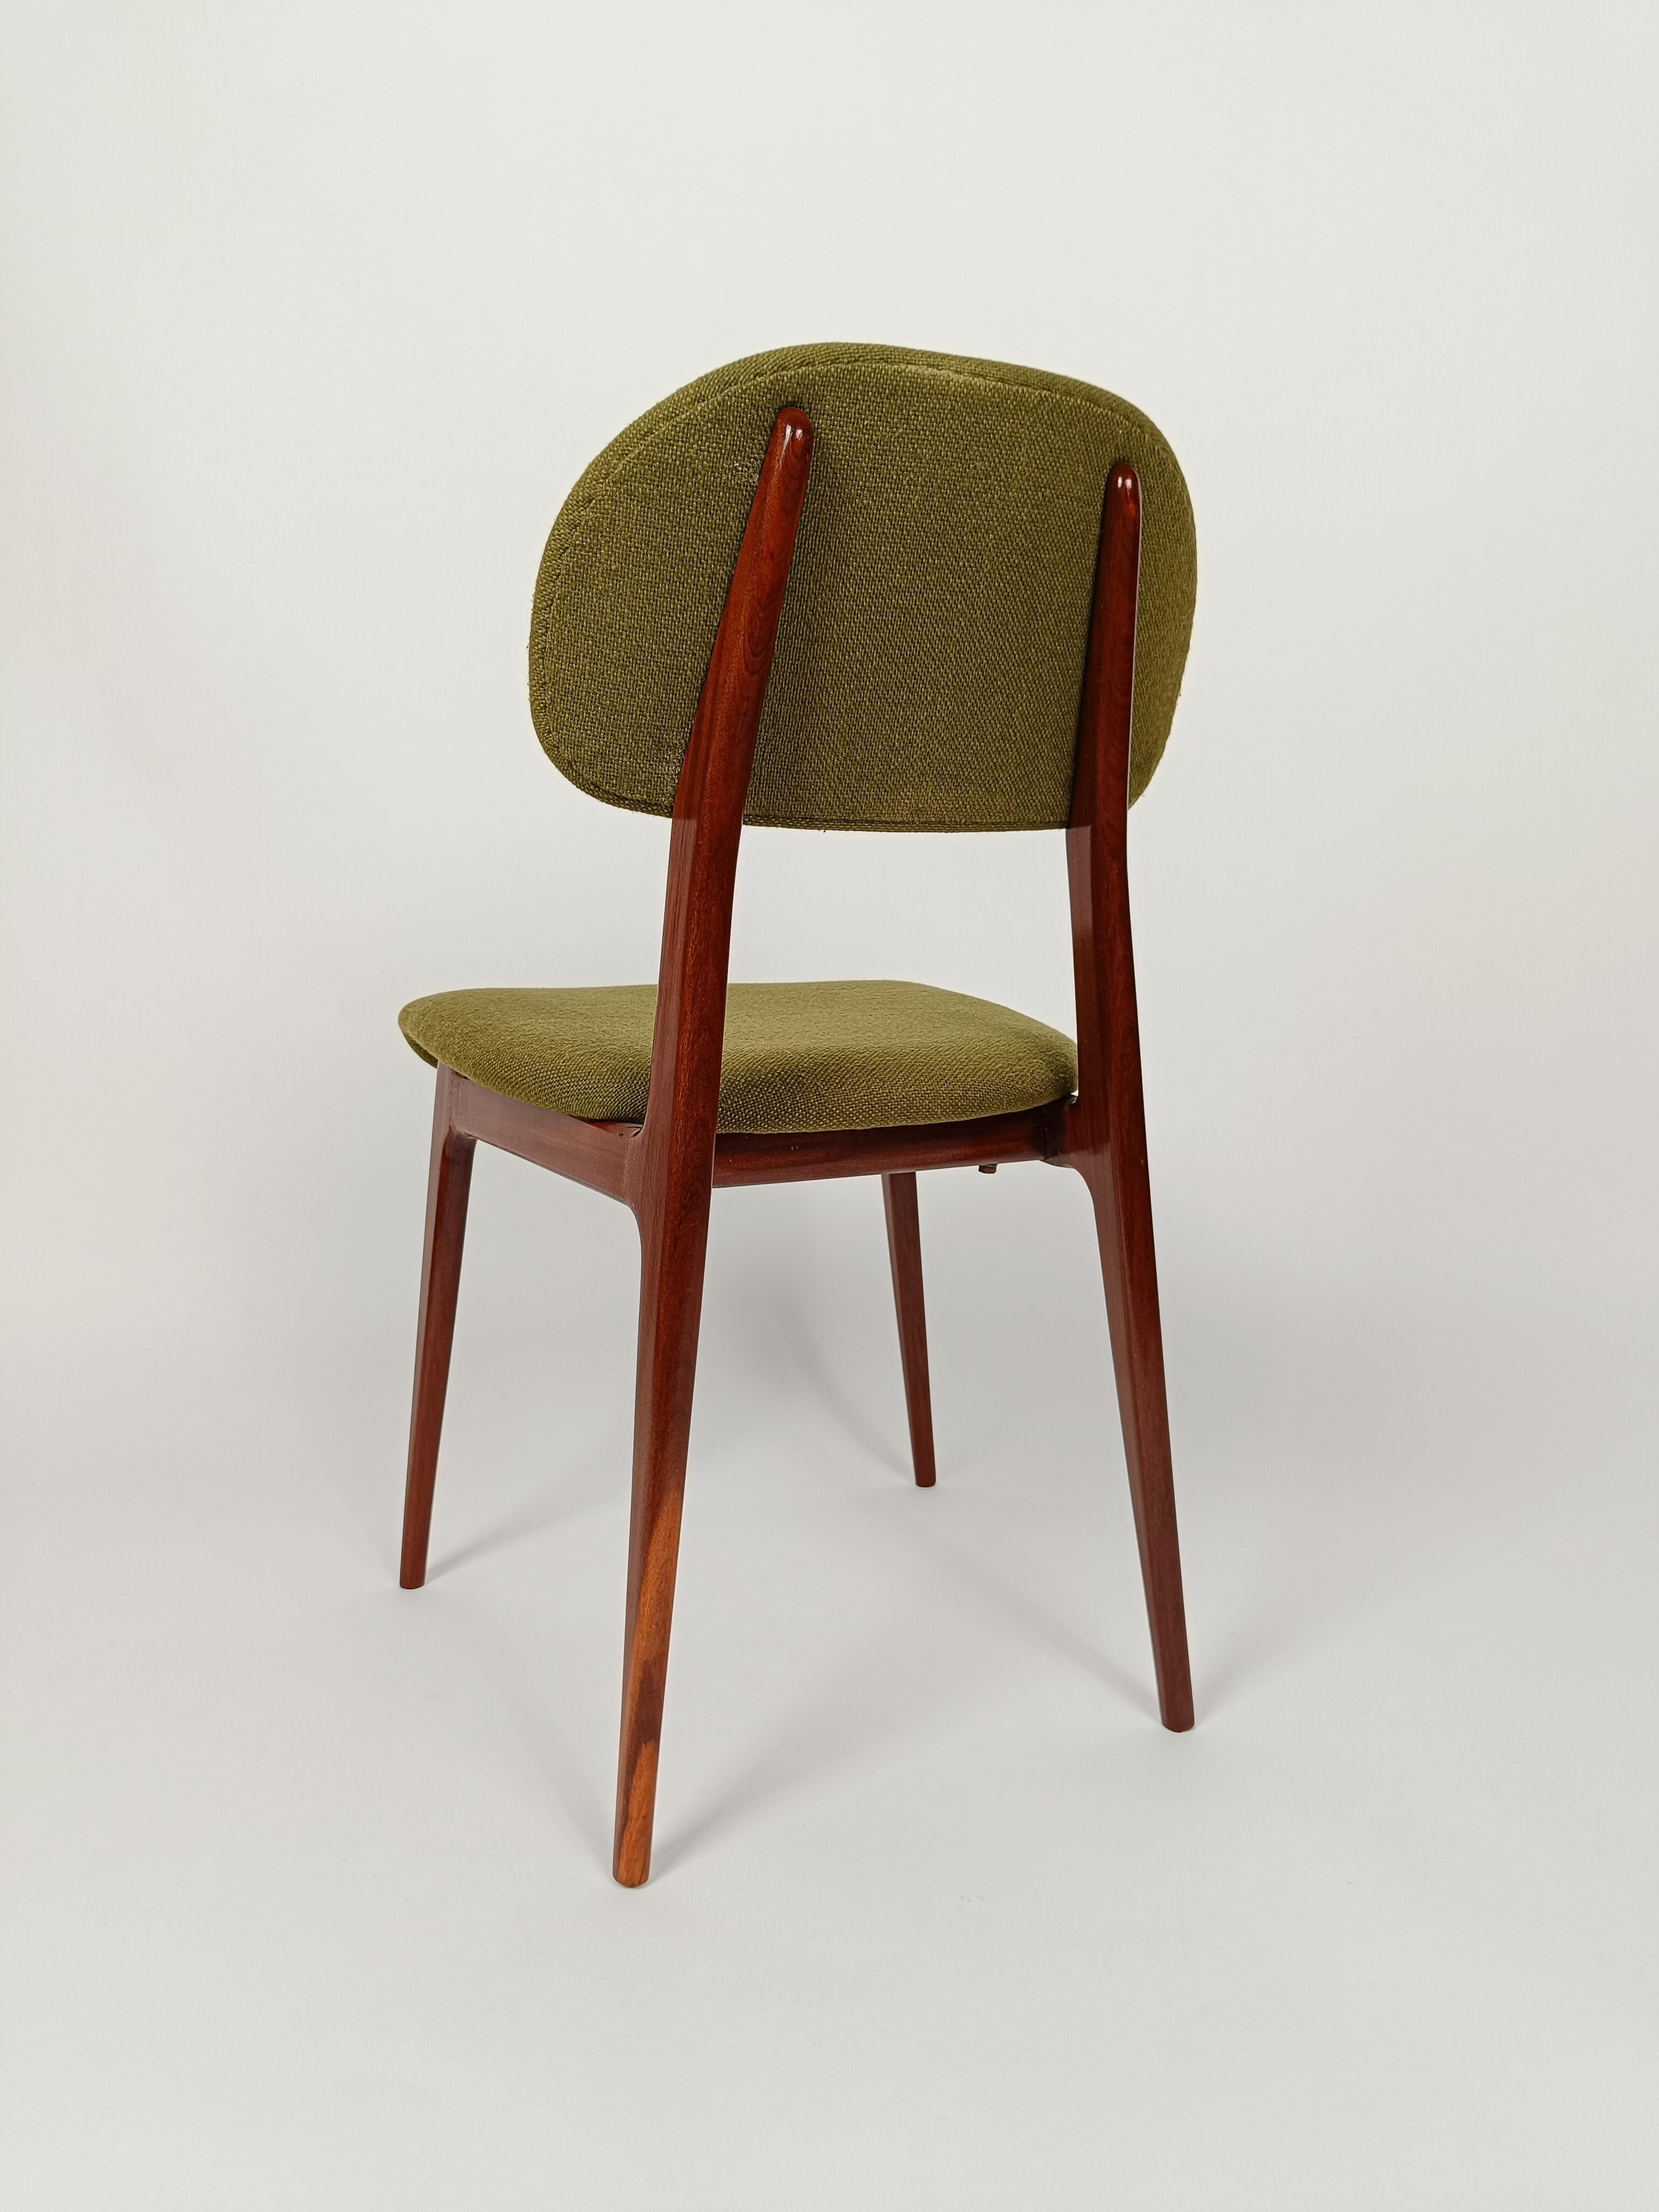 20th Century Italian Midcentury Chairs Attributed to Carlo Hauner and Martin Eisler, 1960s For Sale